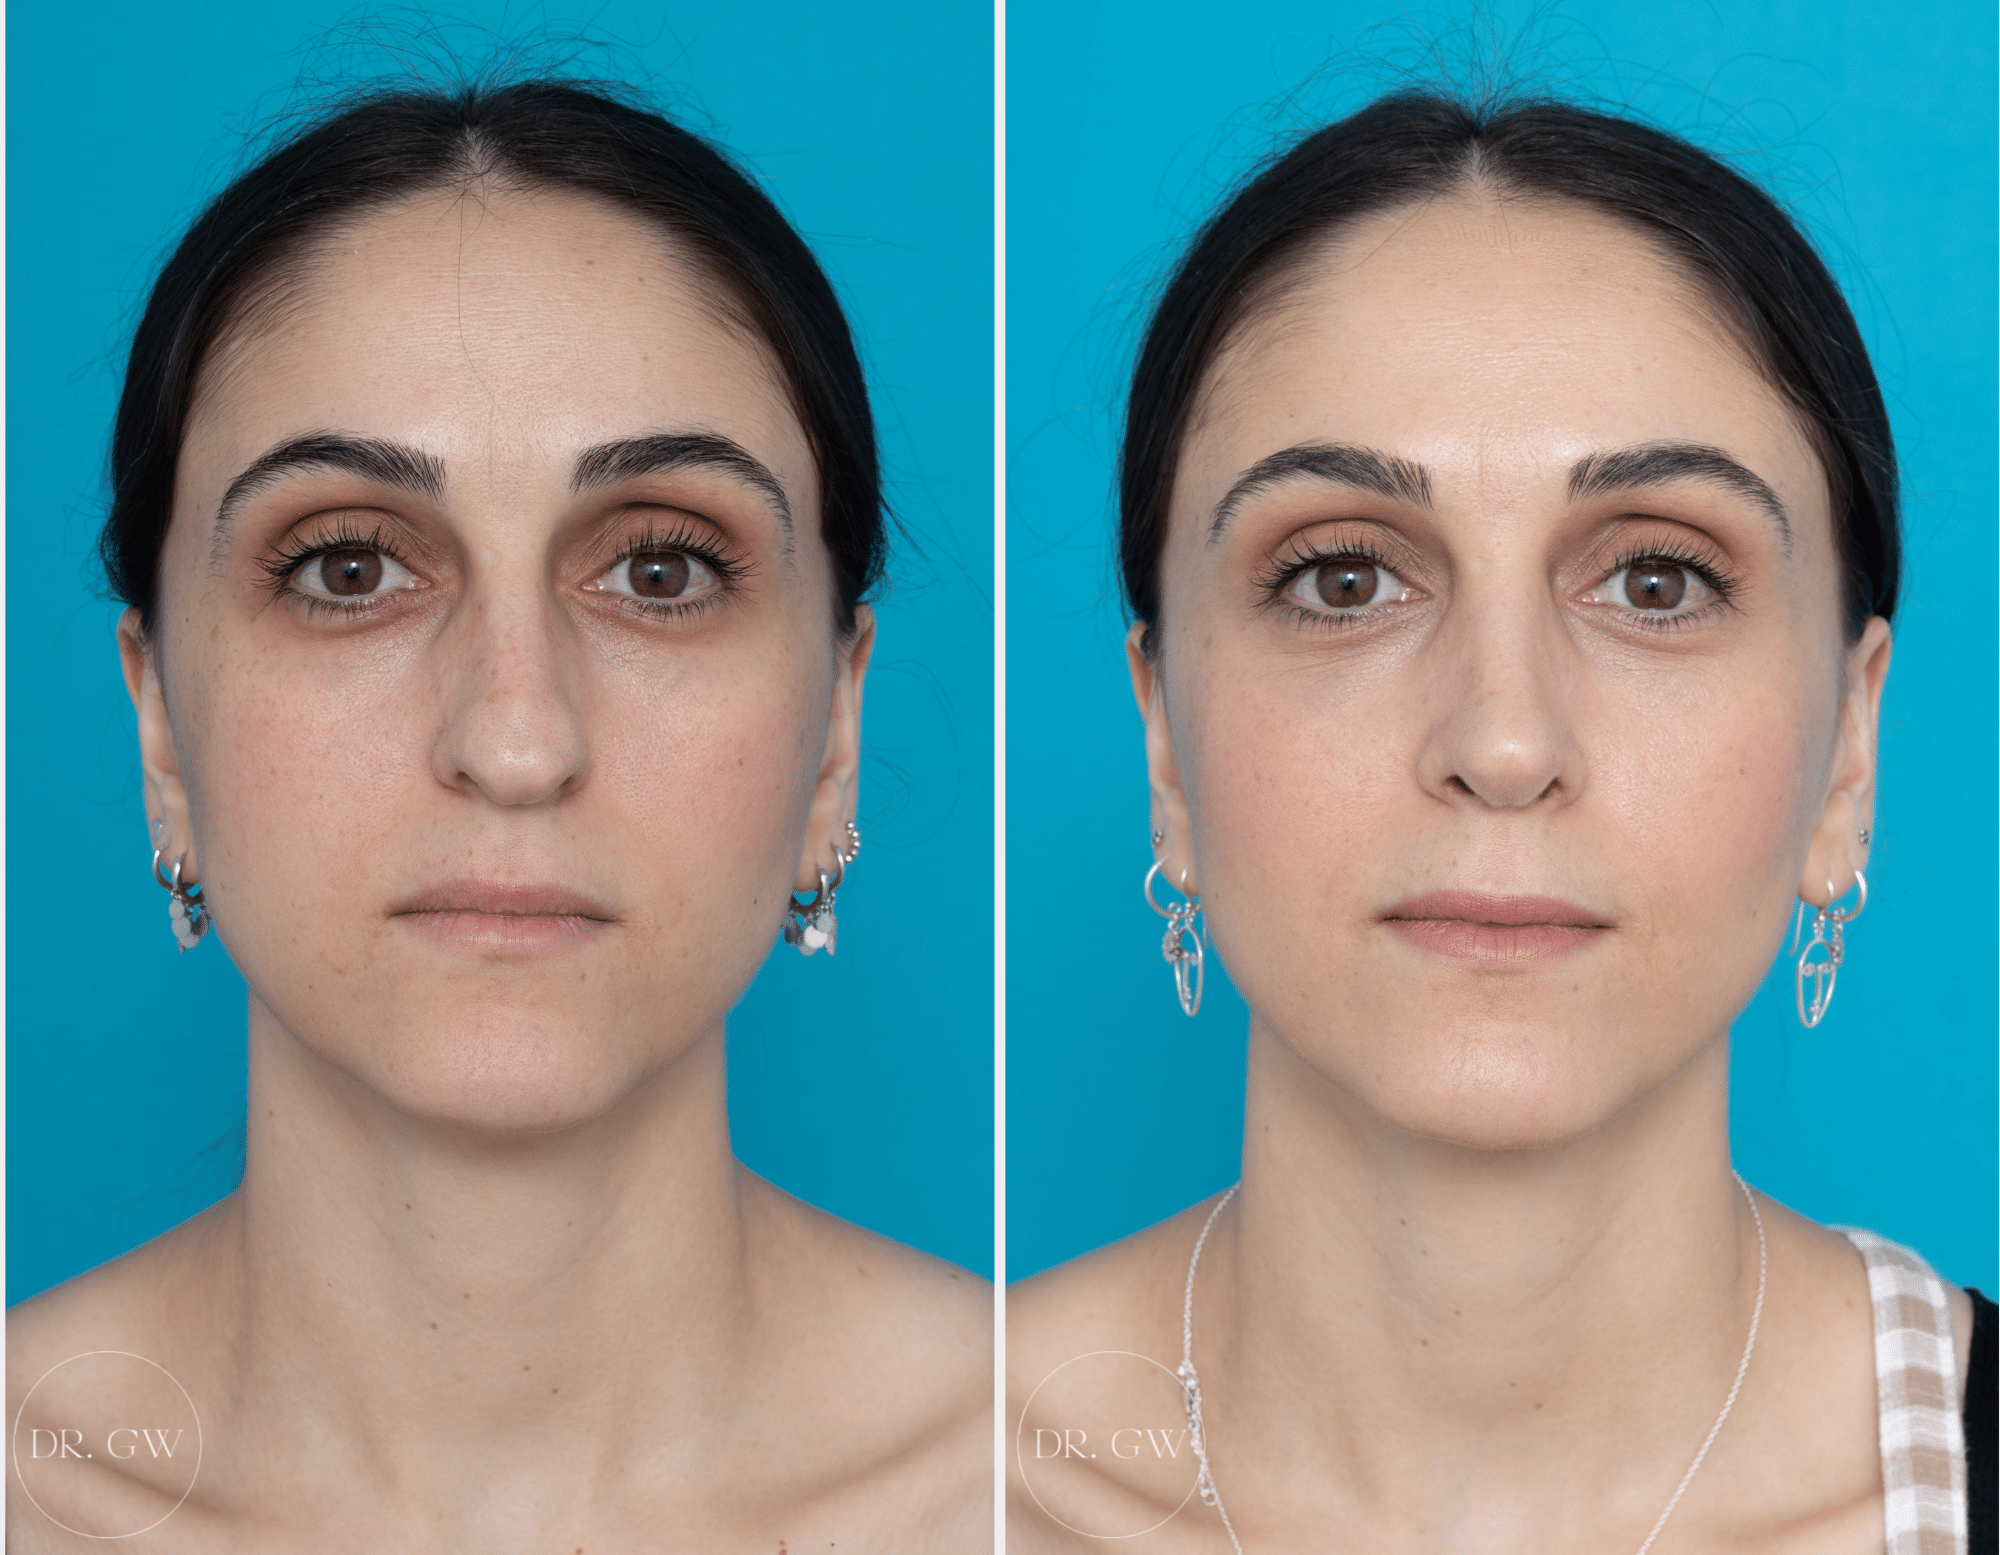 An Upturned Nose Can Be Corrected with Rhinoplasty